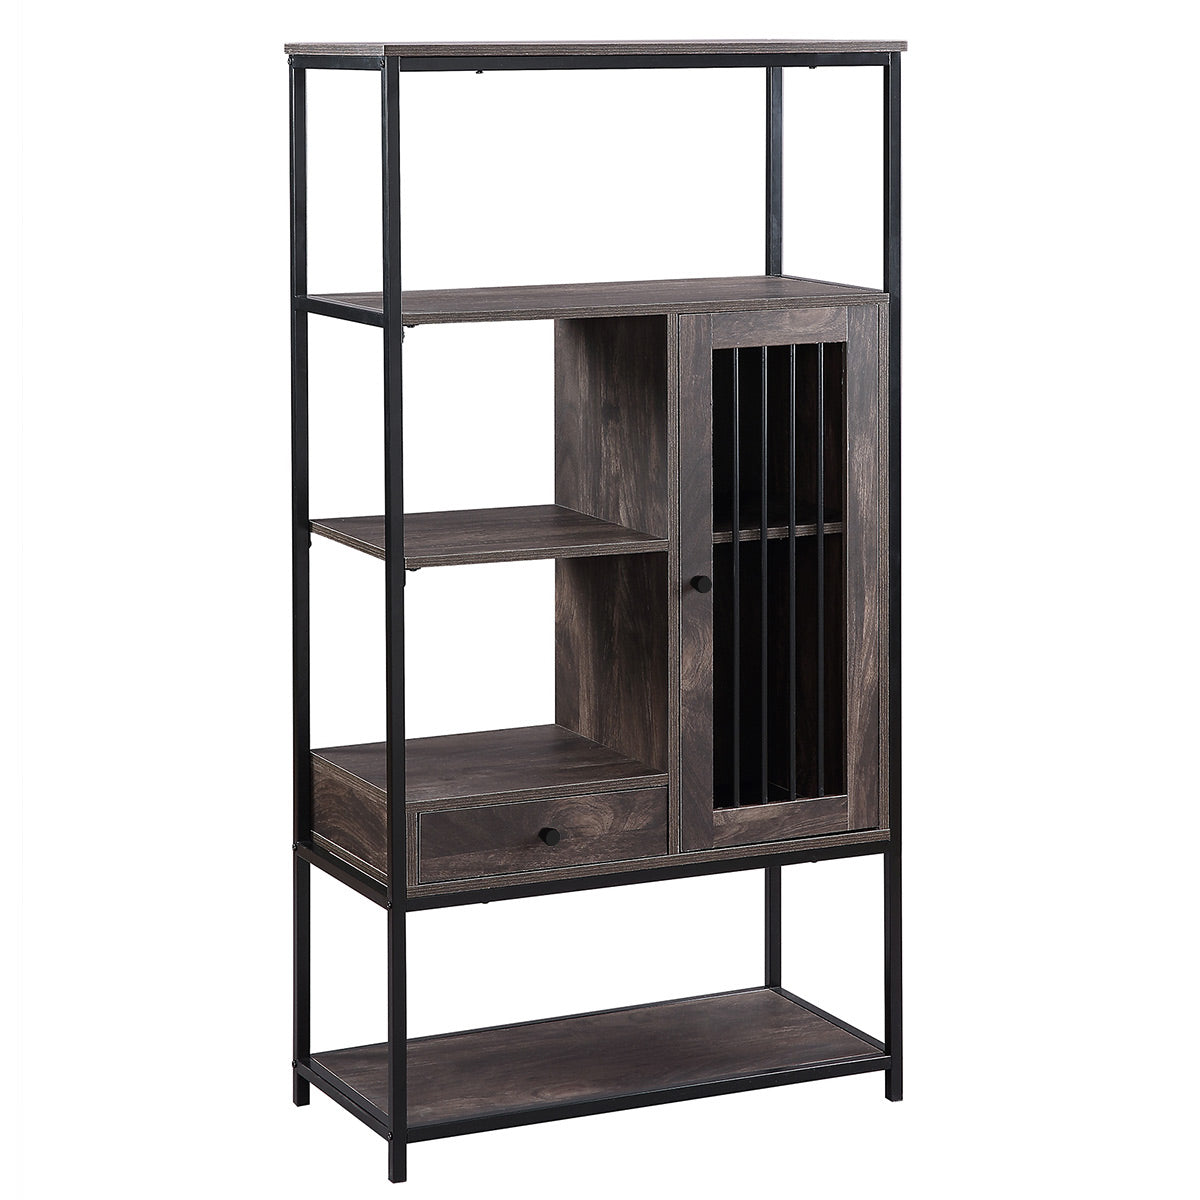 Home Office Bookcase and Bookshelf 5 Tier Display